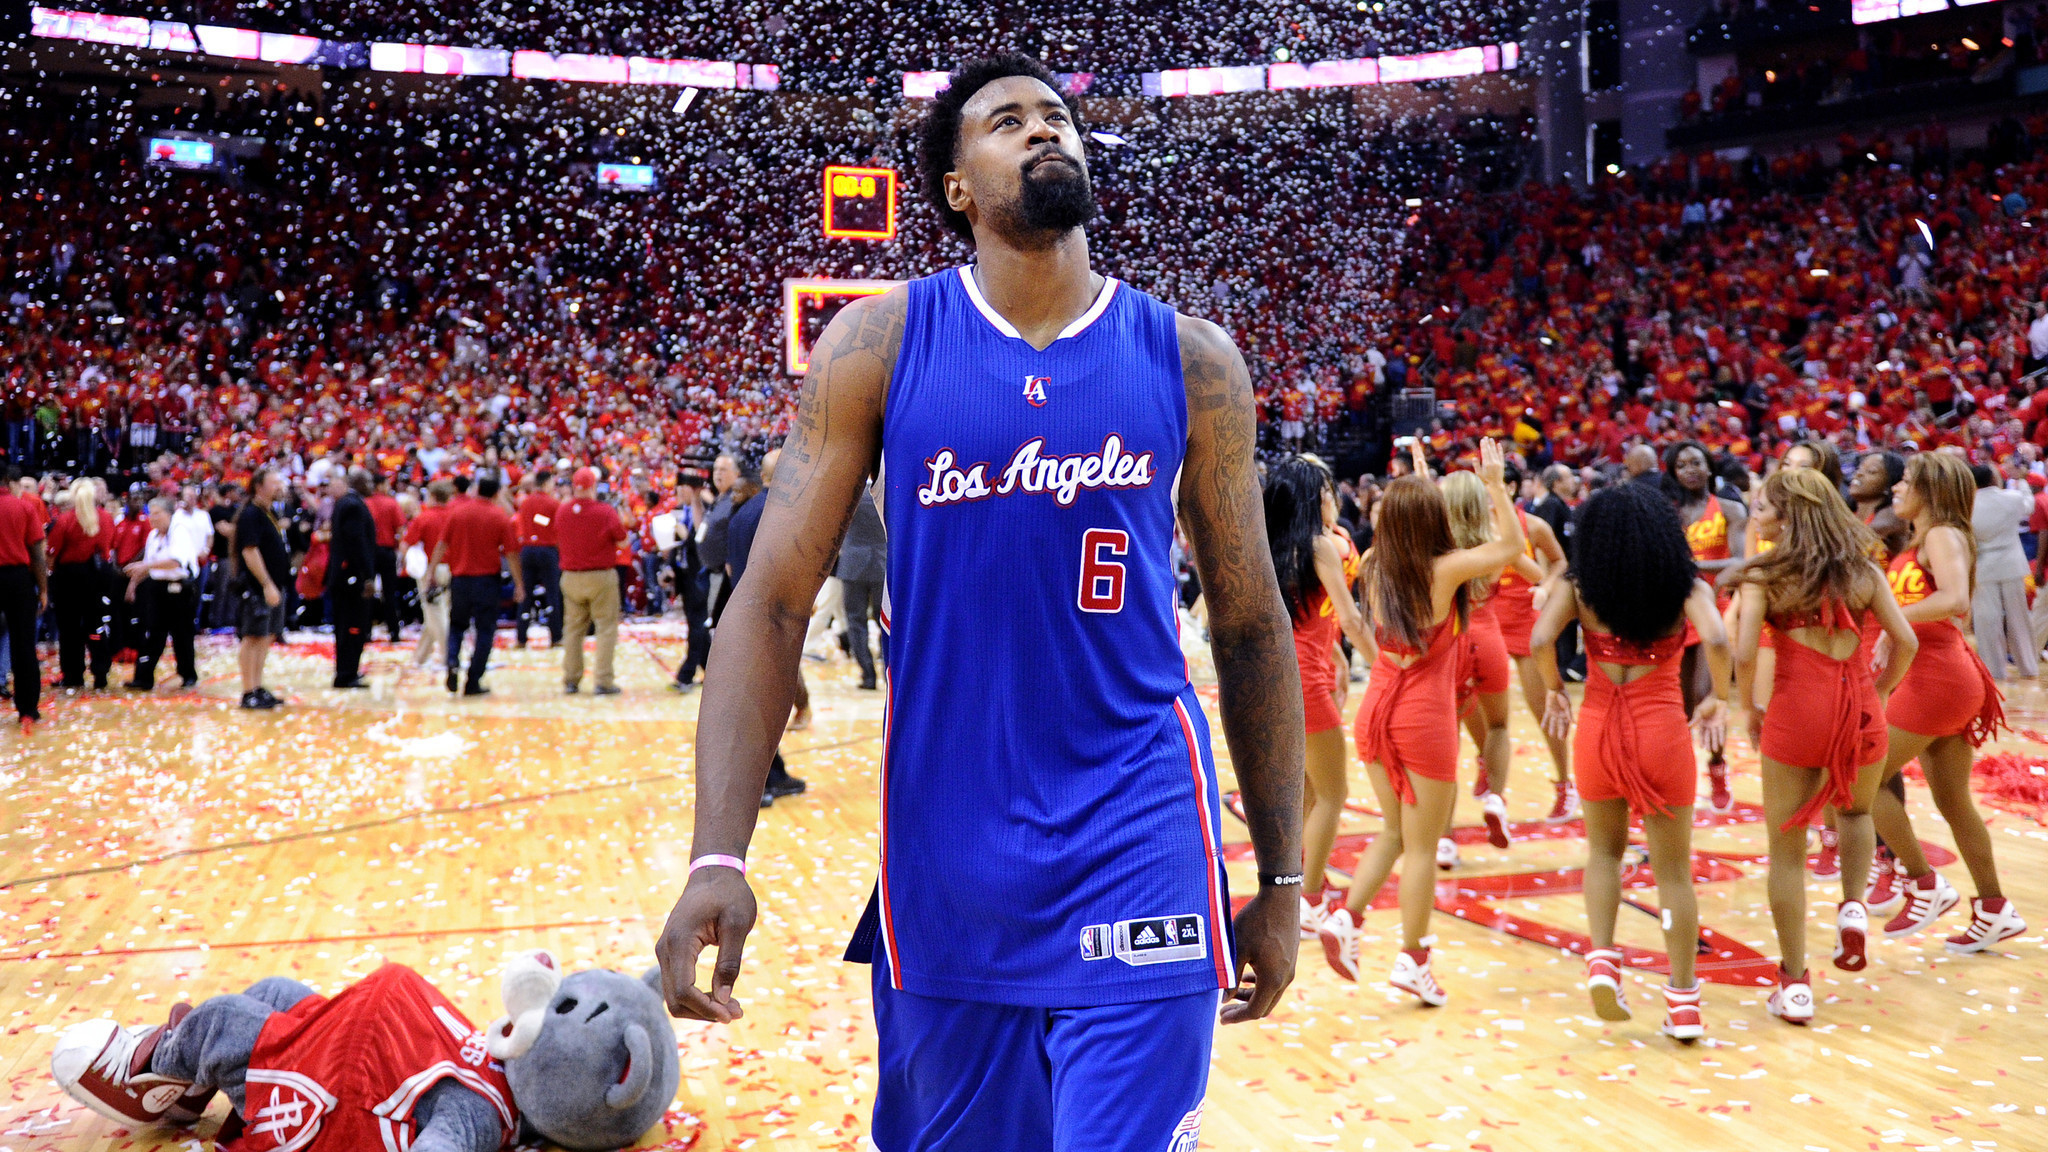 Clippers players want to keep roster intact despite Game 7 loss - LA Times